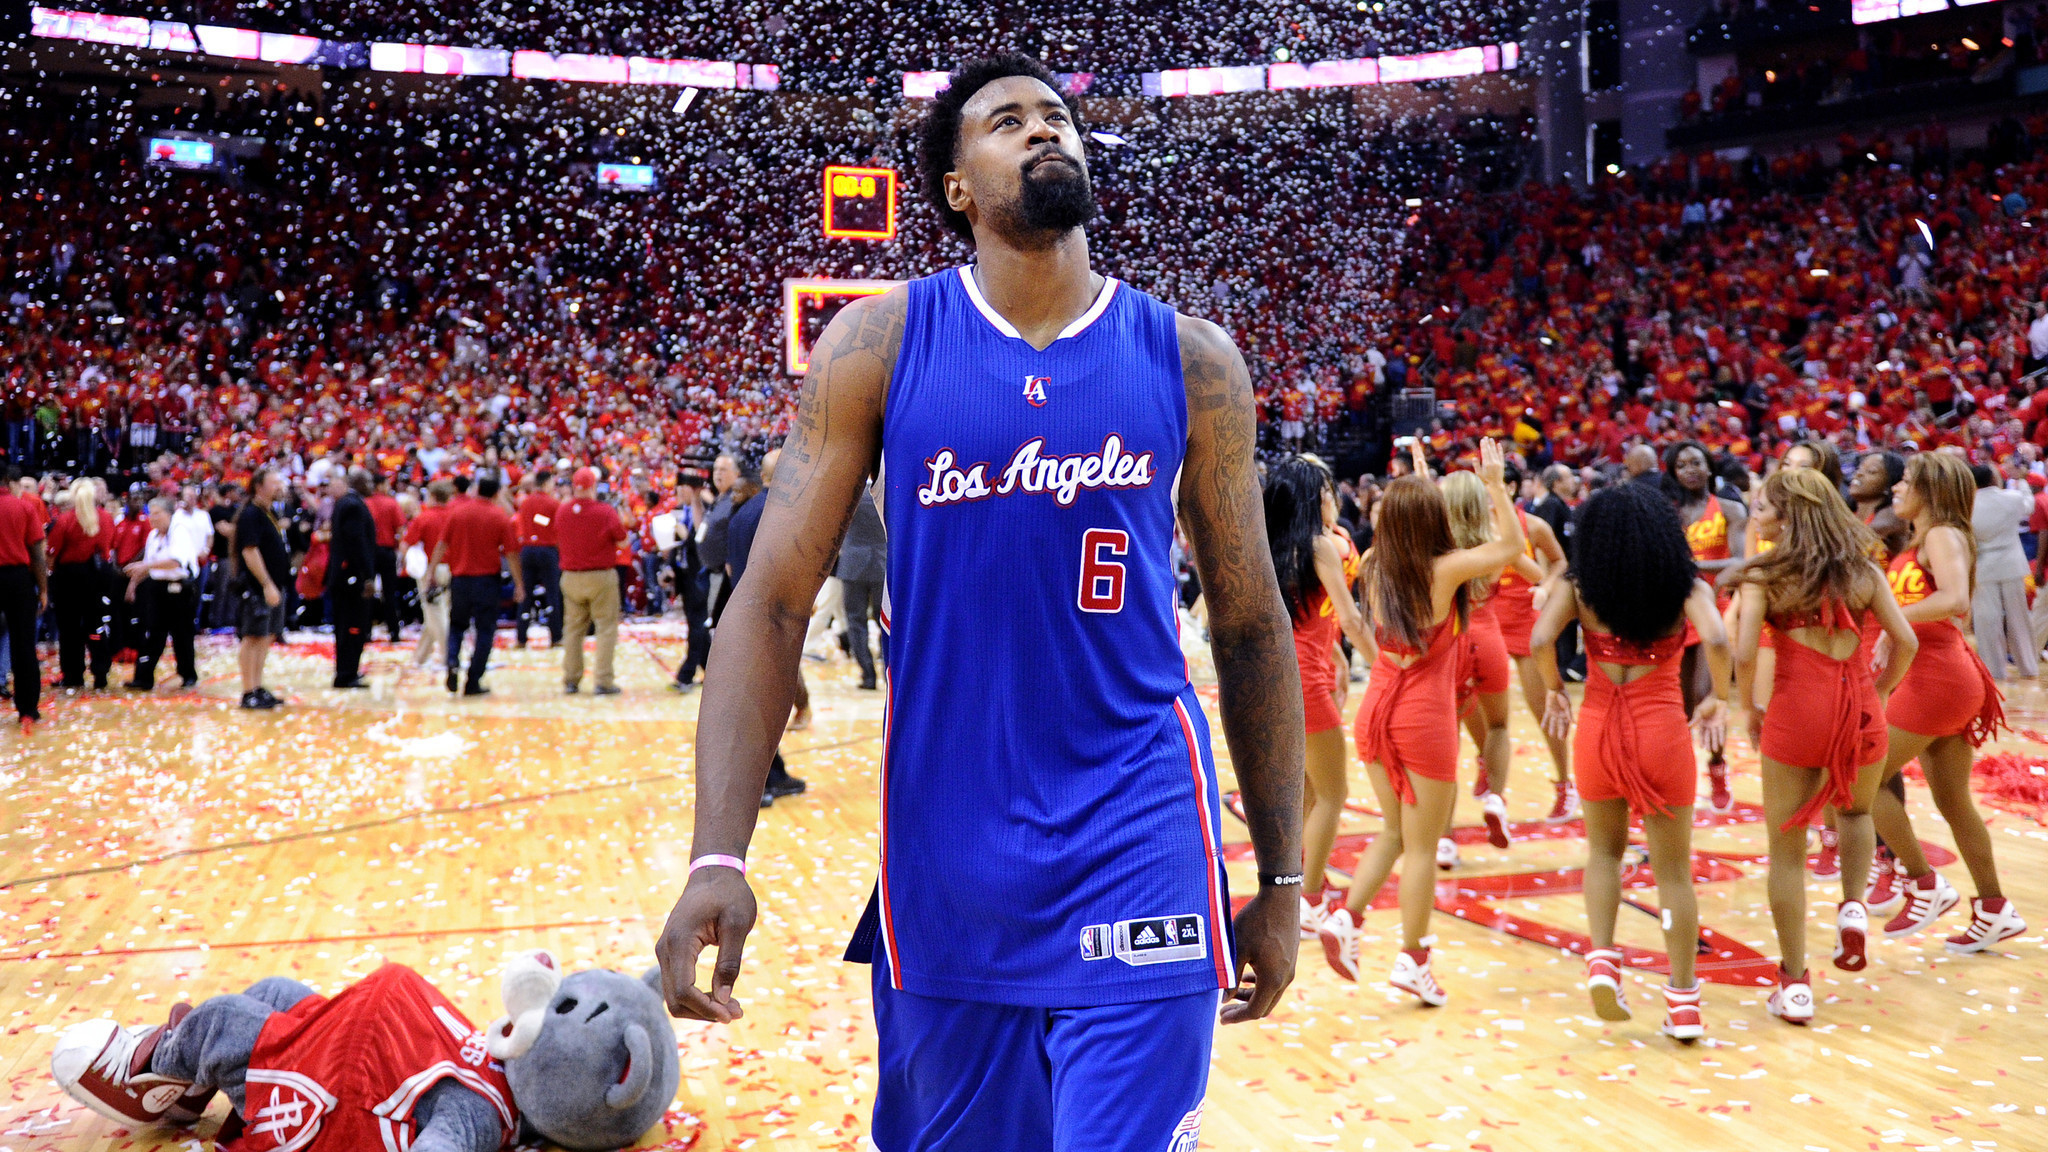 Clippers players want to keep roster intact despite Game 7 loss - LA Times